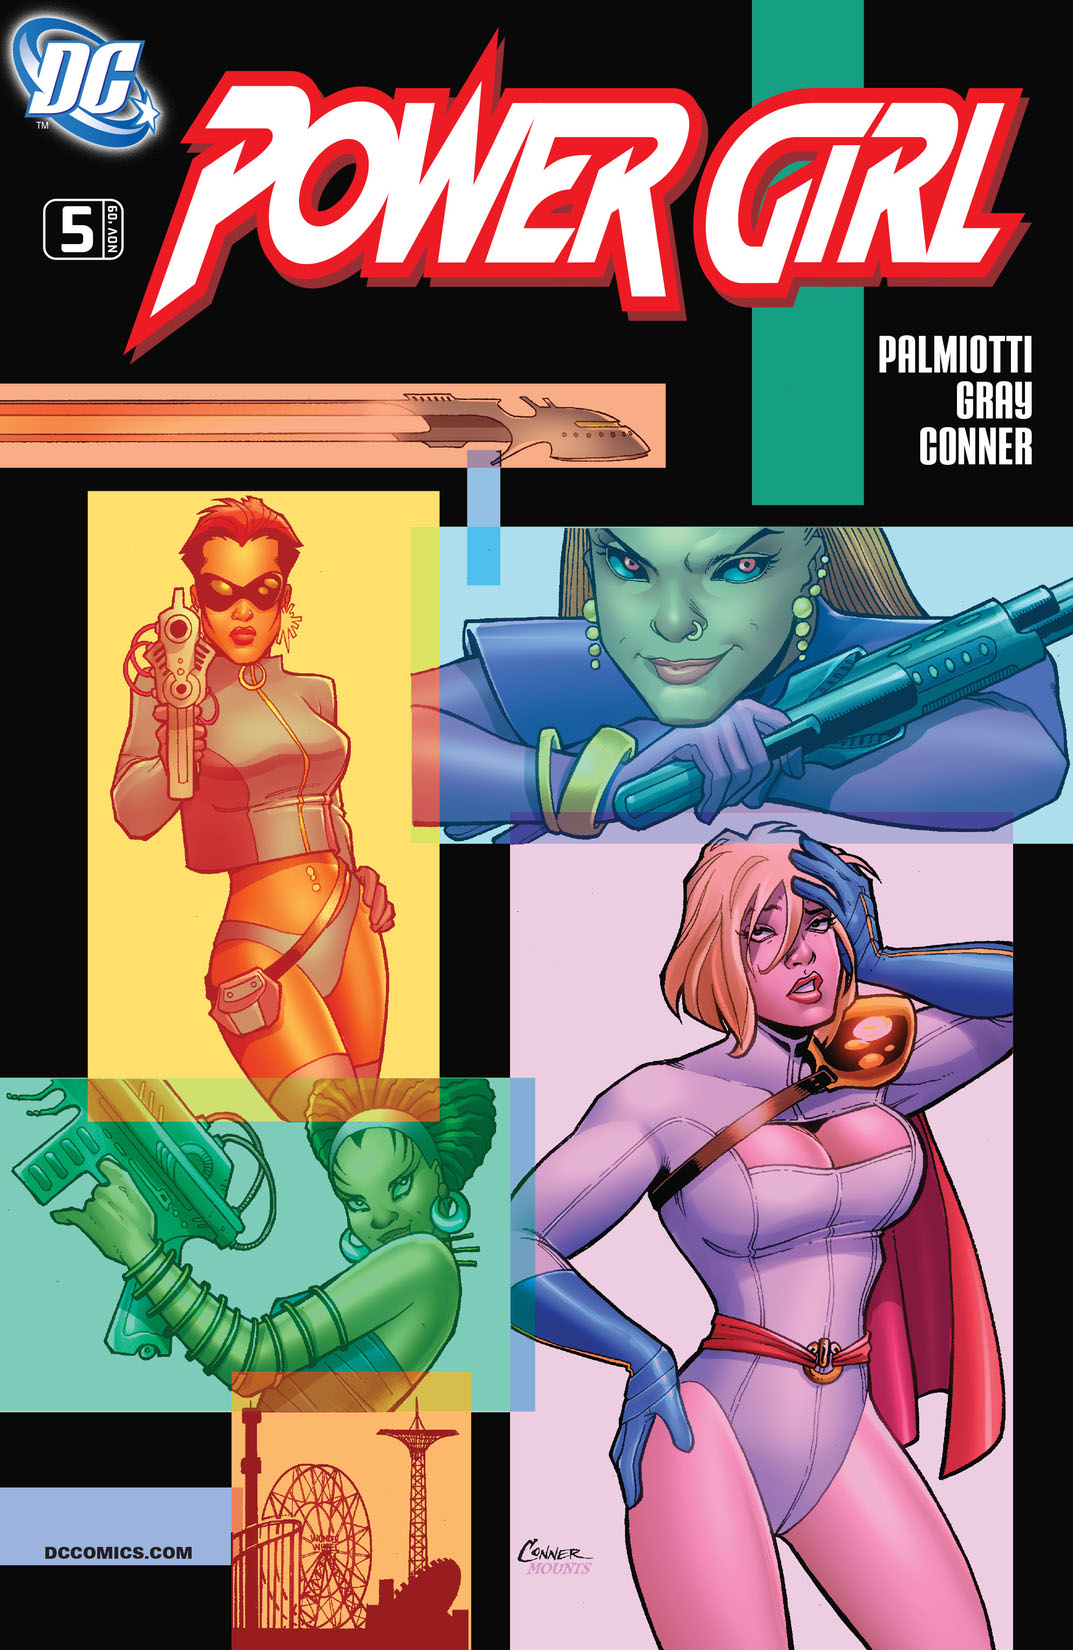 Power Girl (2009-) #5 preview images